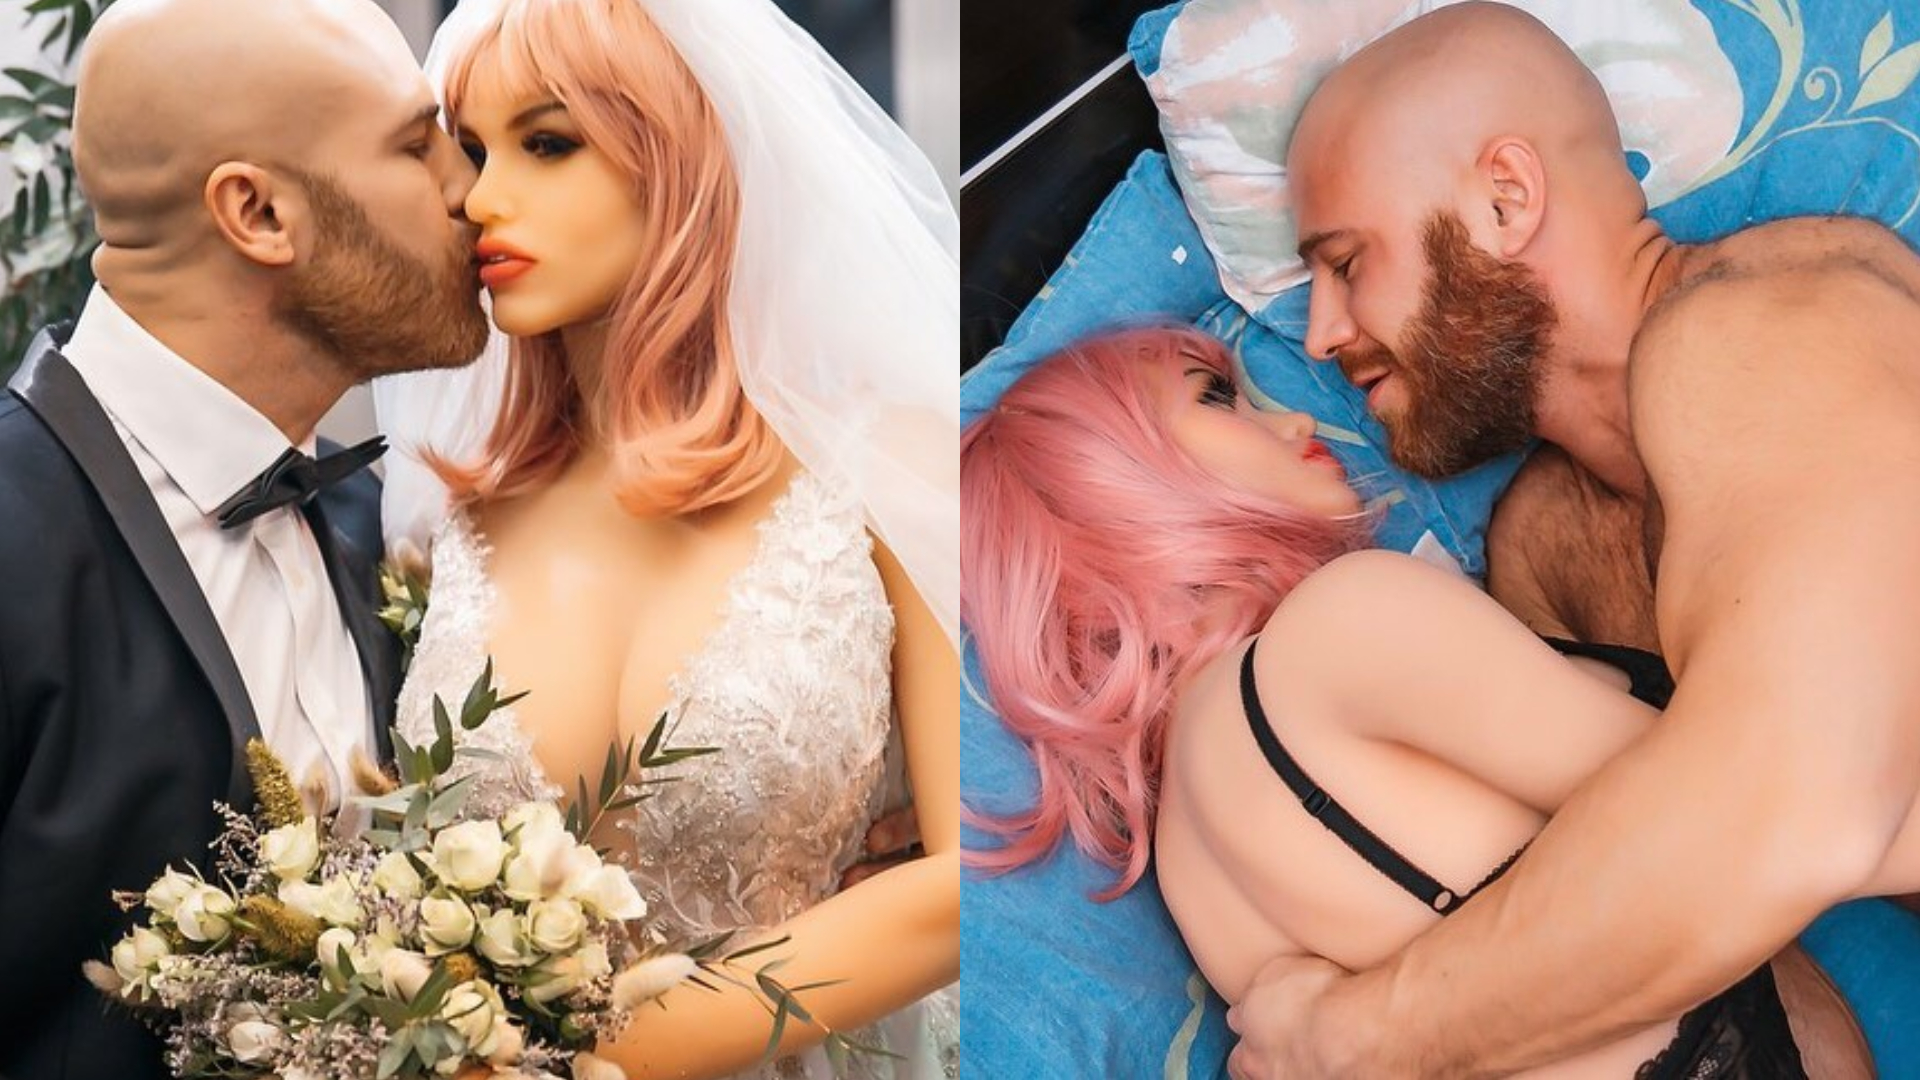 A men kissing a sex doll wearing a wedding dress on the left and hugging it on the right side